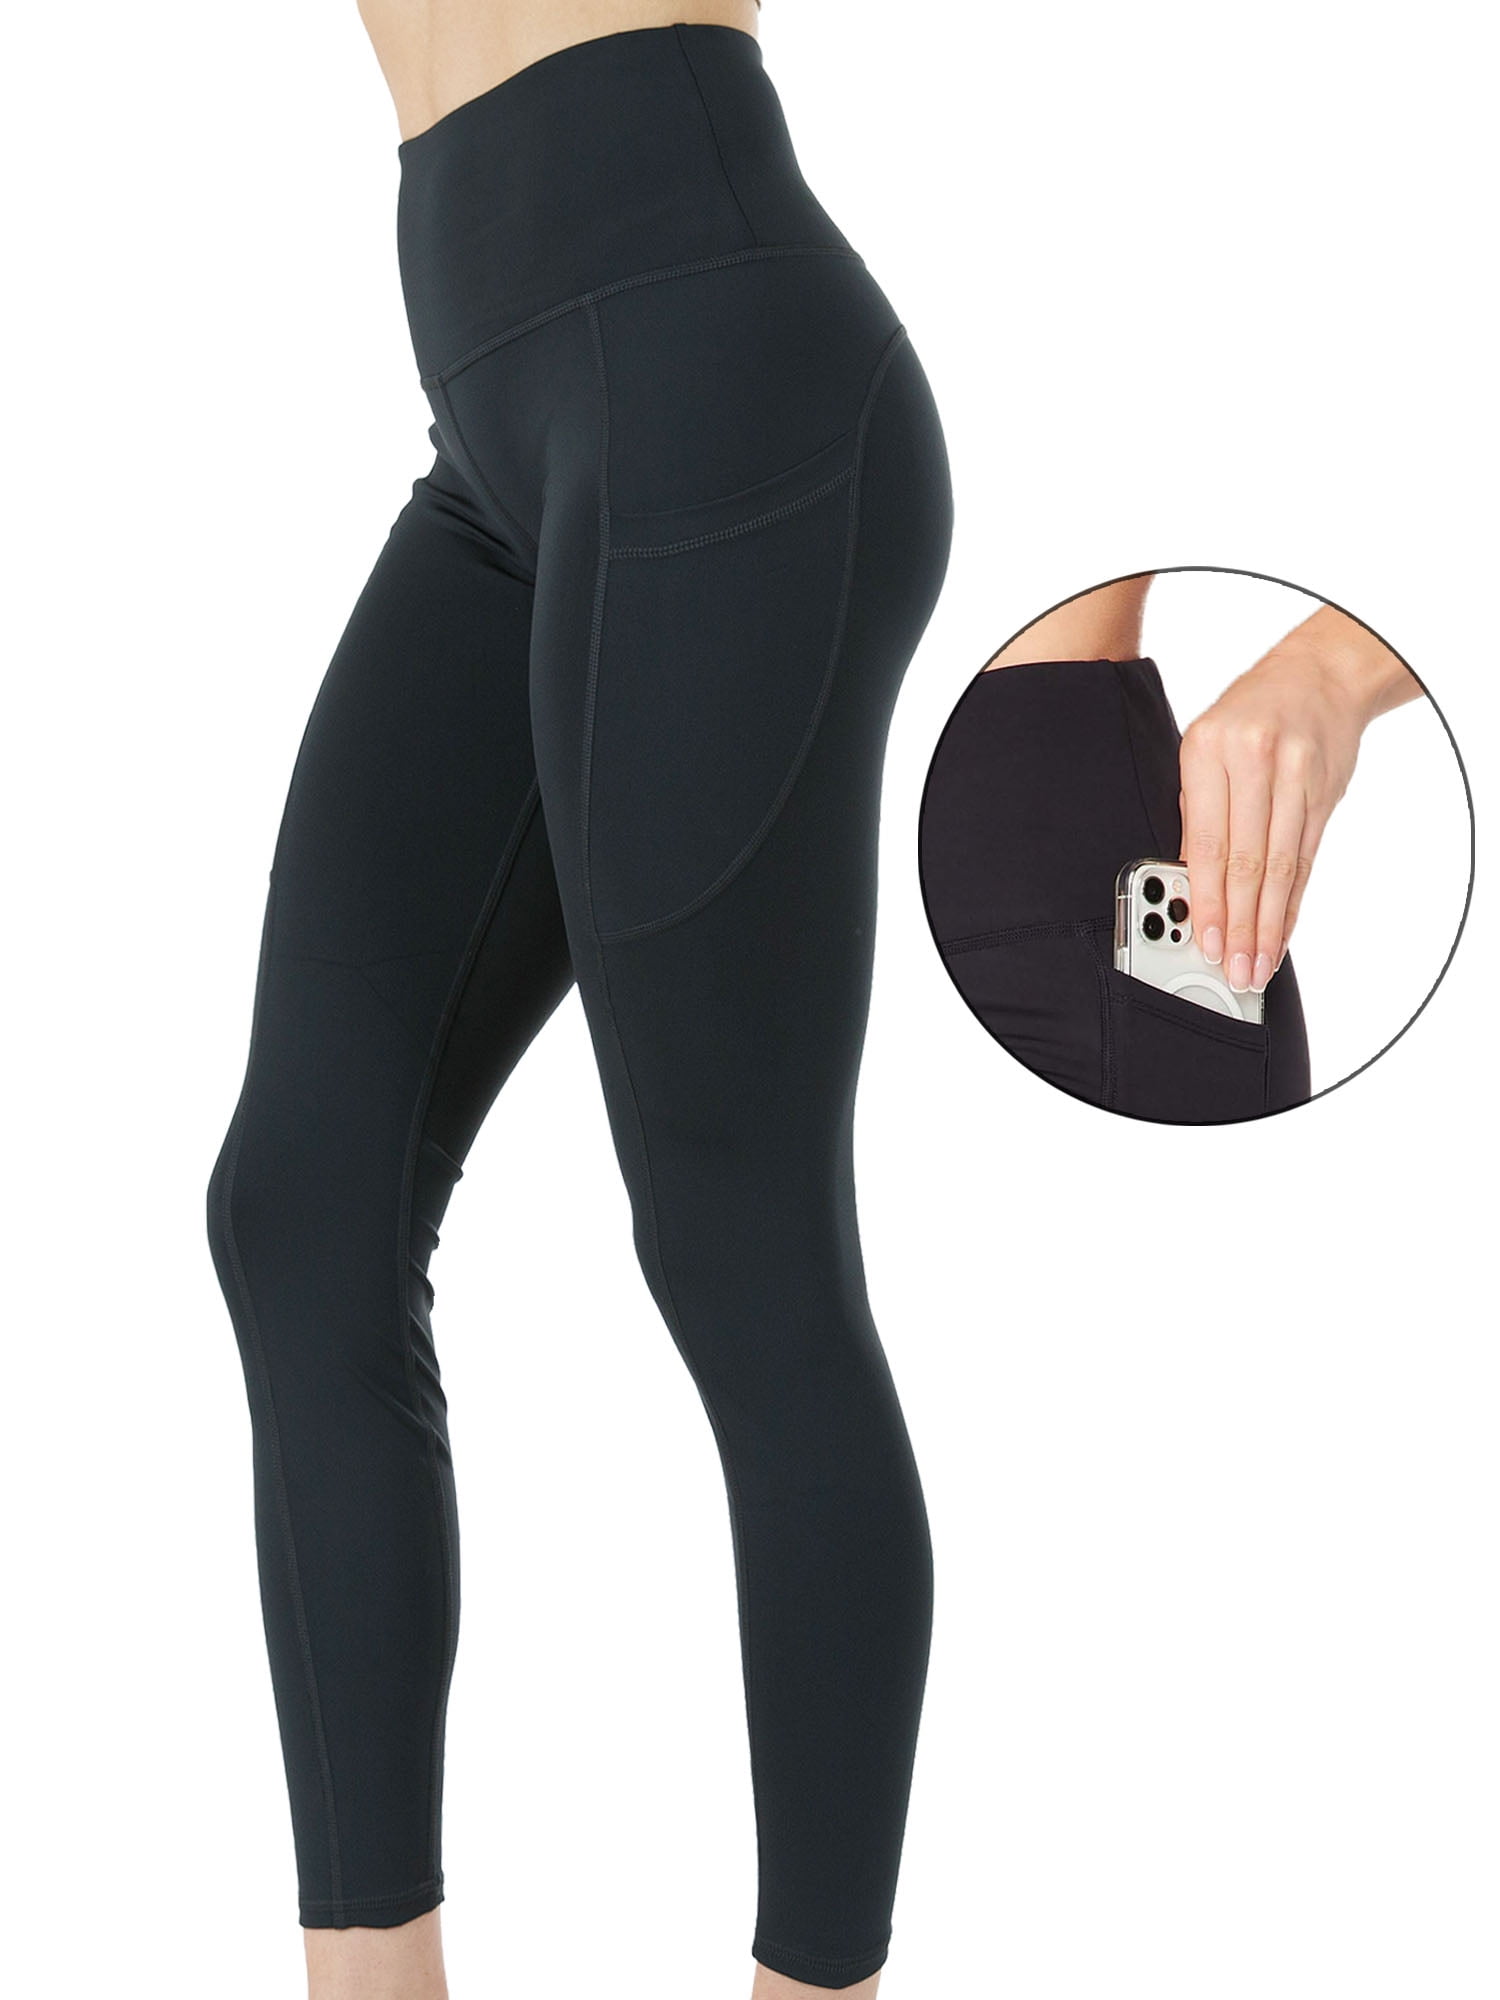 Fartey High Waist Yoga Pants for Women Plus Size Tummy Control Workout Leggings Trendy Elastic Waisted Tights Slim Comfy Butt Lifting Athletic Joggers